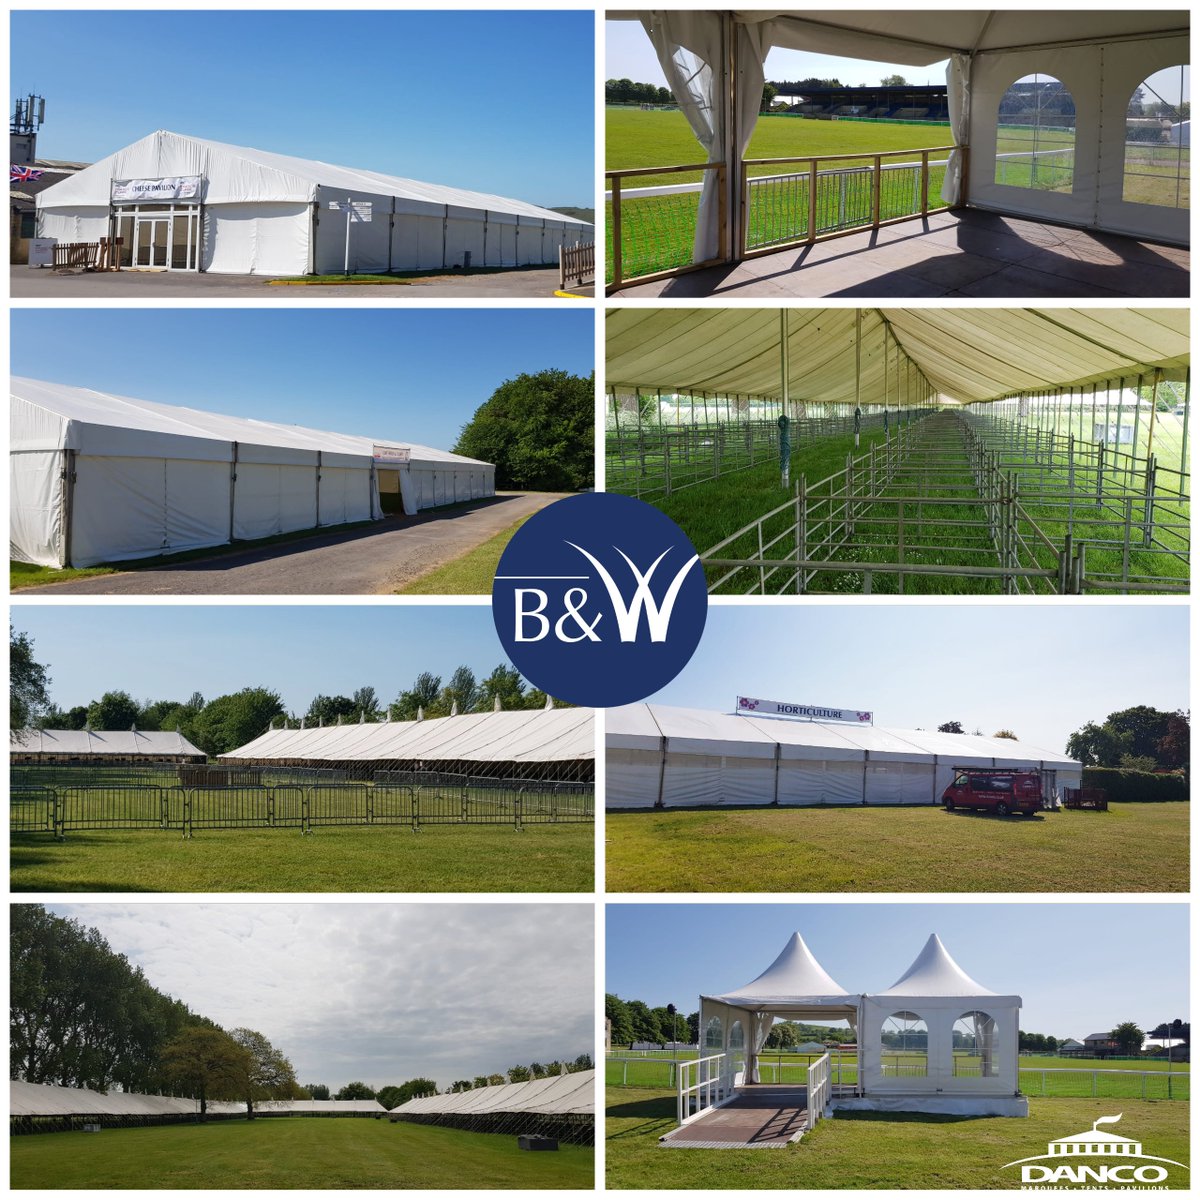 The Royal Bath and West Show 2023 has opened it gates and starts today 🎉🌷 

The Danco team have done an amazing job erecting a wide range of structures for the 3 day event 👏😀

#marquee #marqueehire #eventprofs #events #royalbathandwestshow